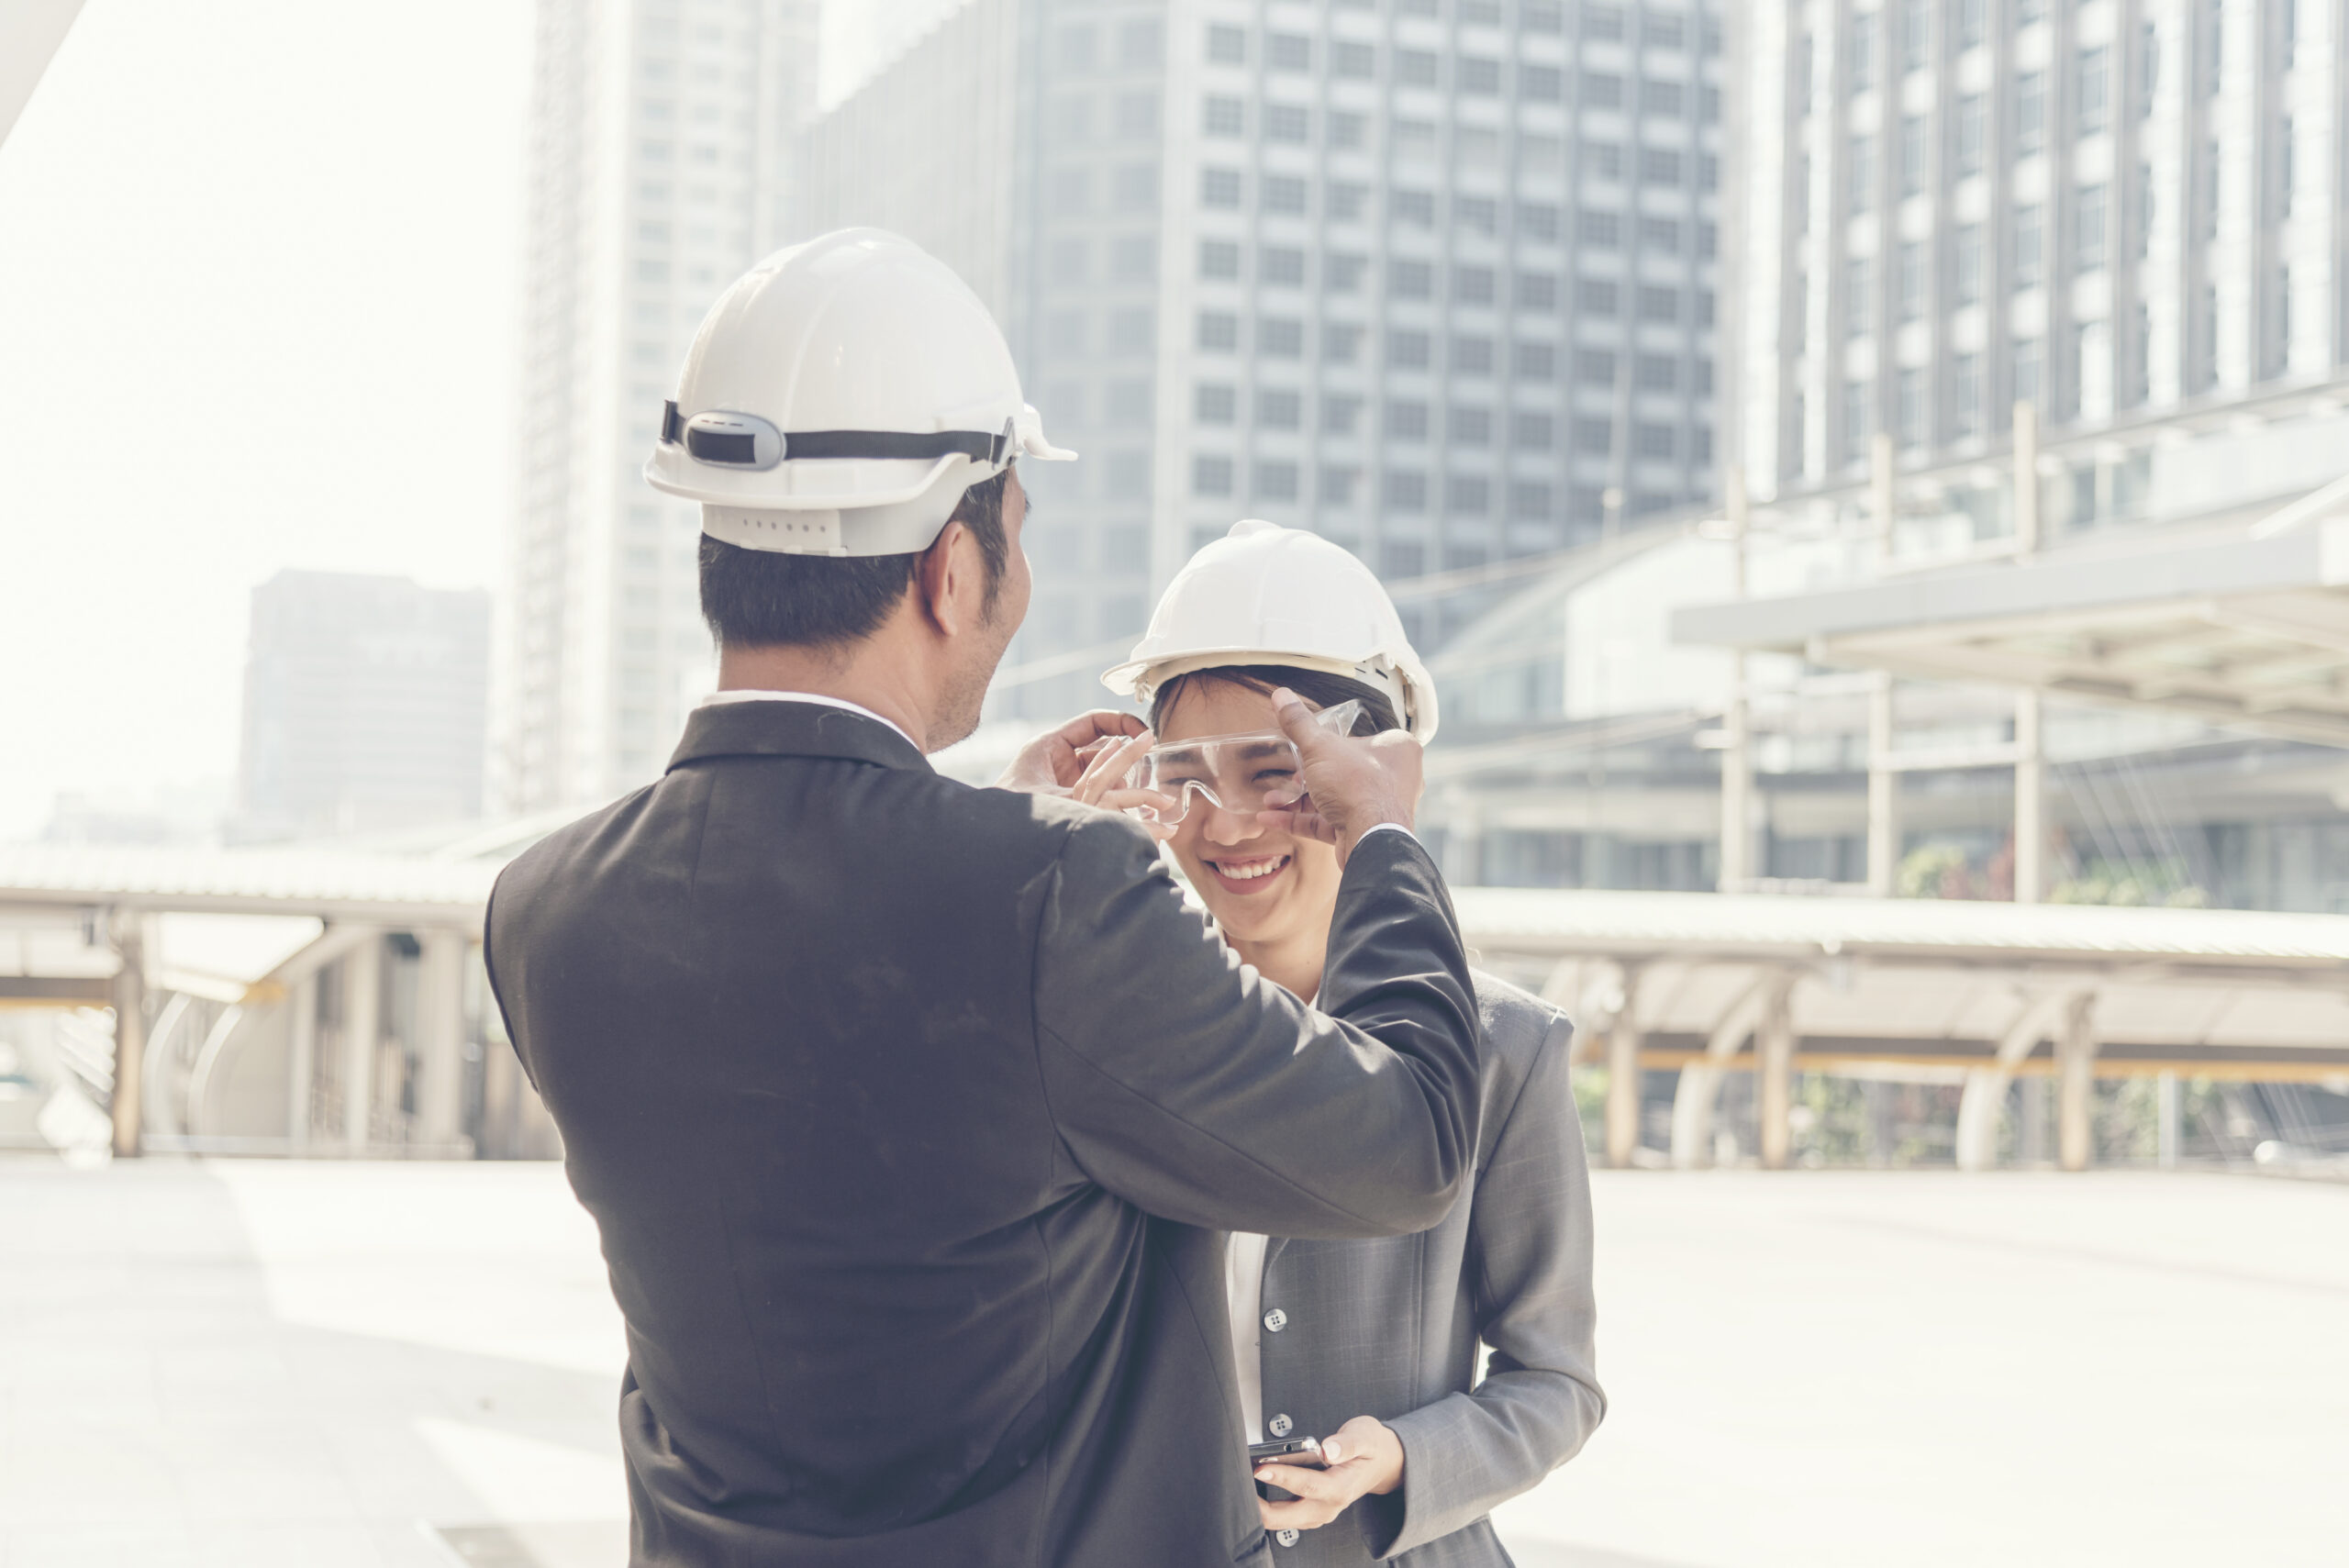 Engineer Holding Wearing Protective Eyewear To Colleague Outdoors